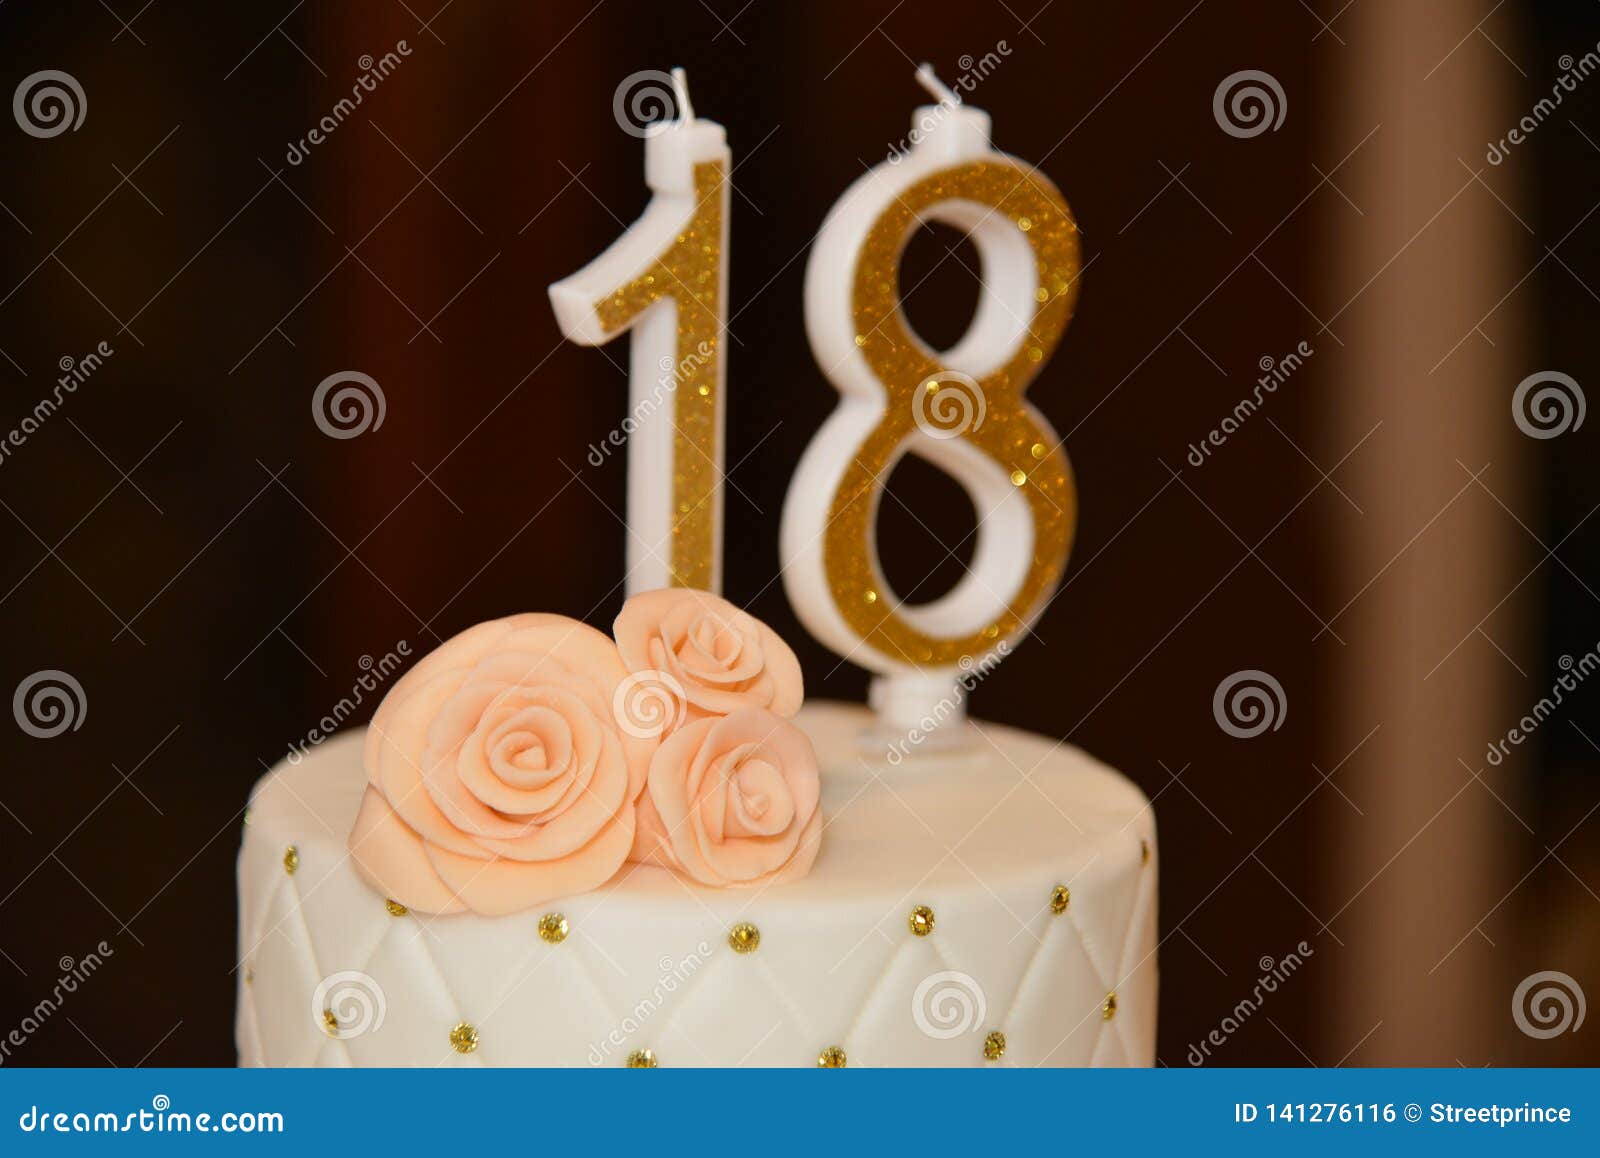 cake for 18 years old girl